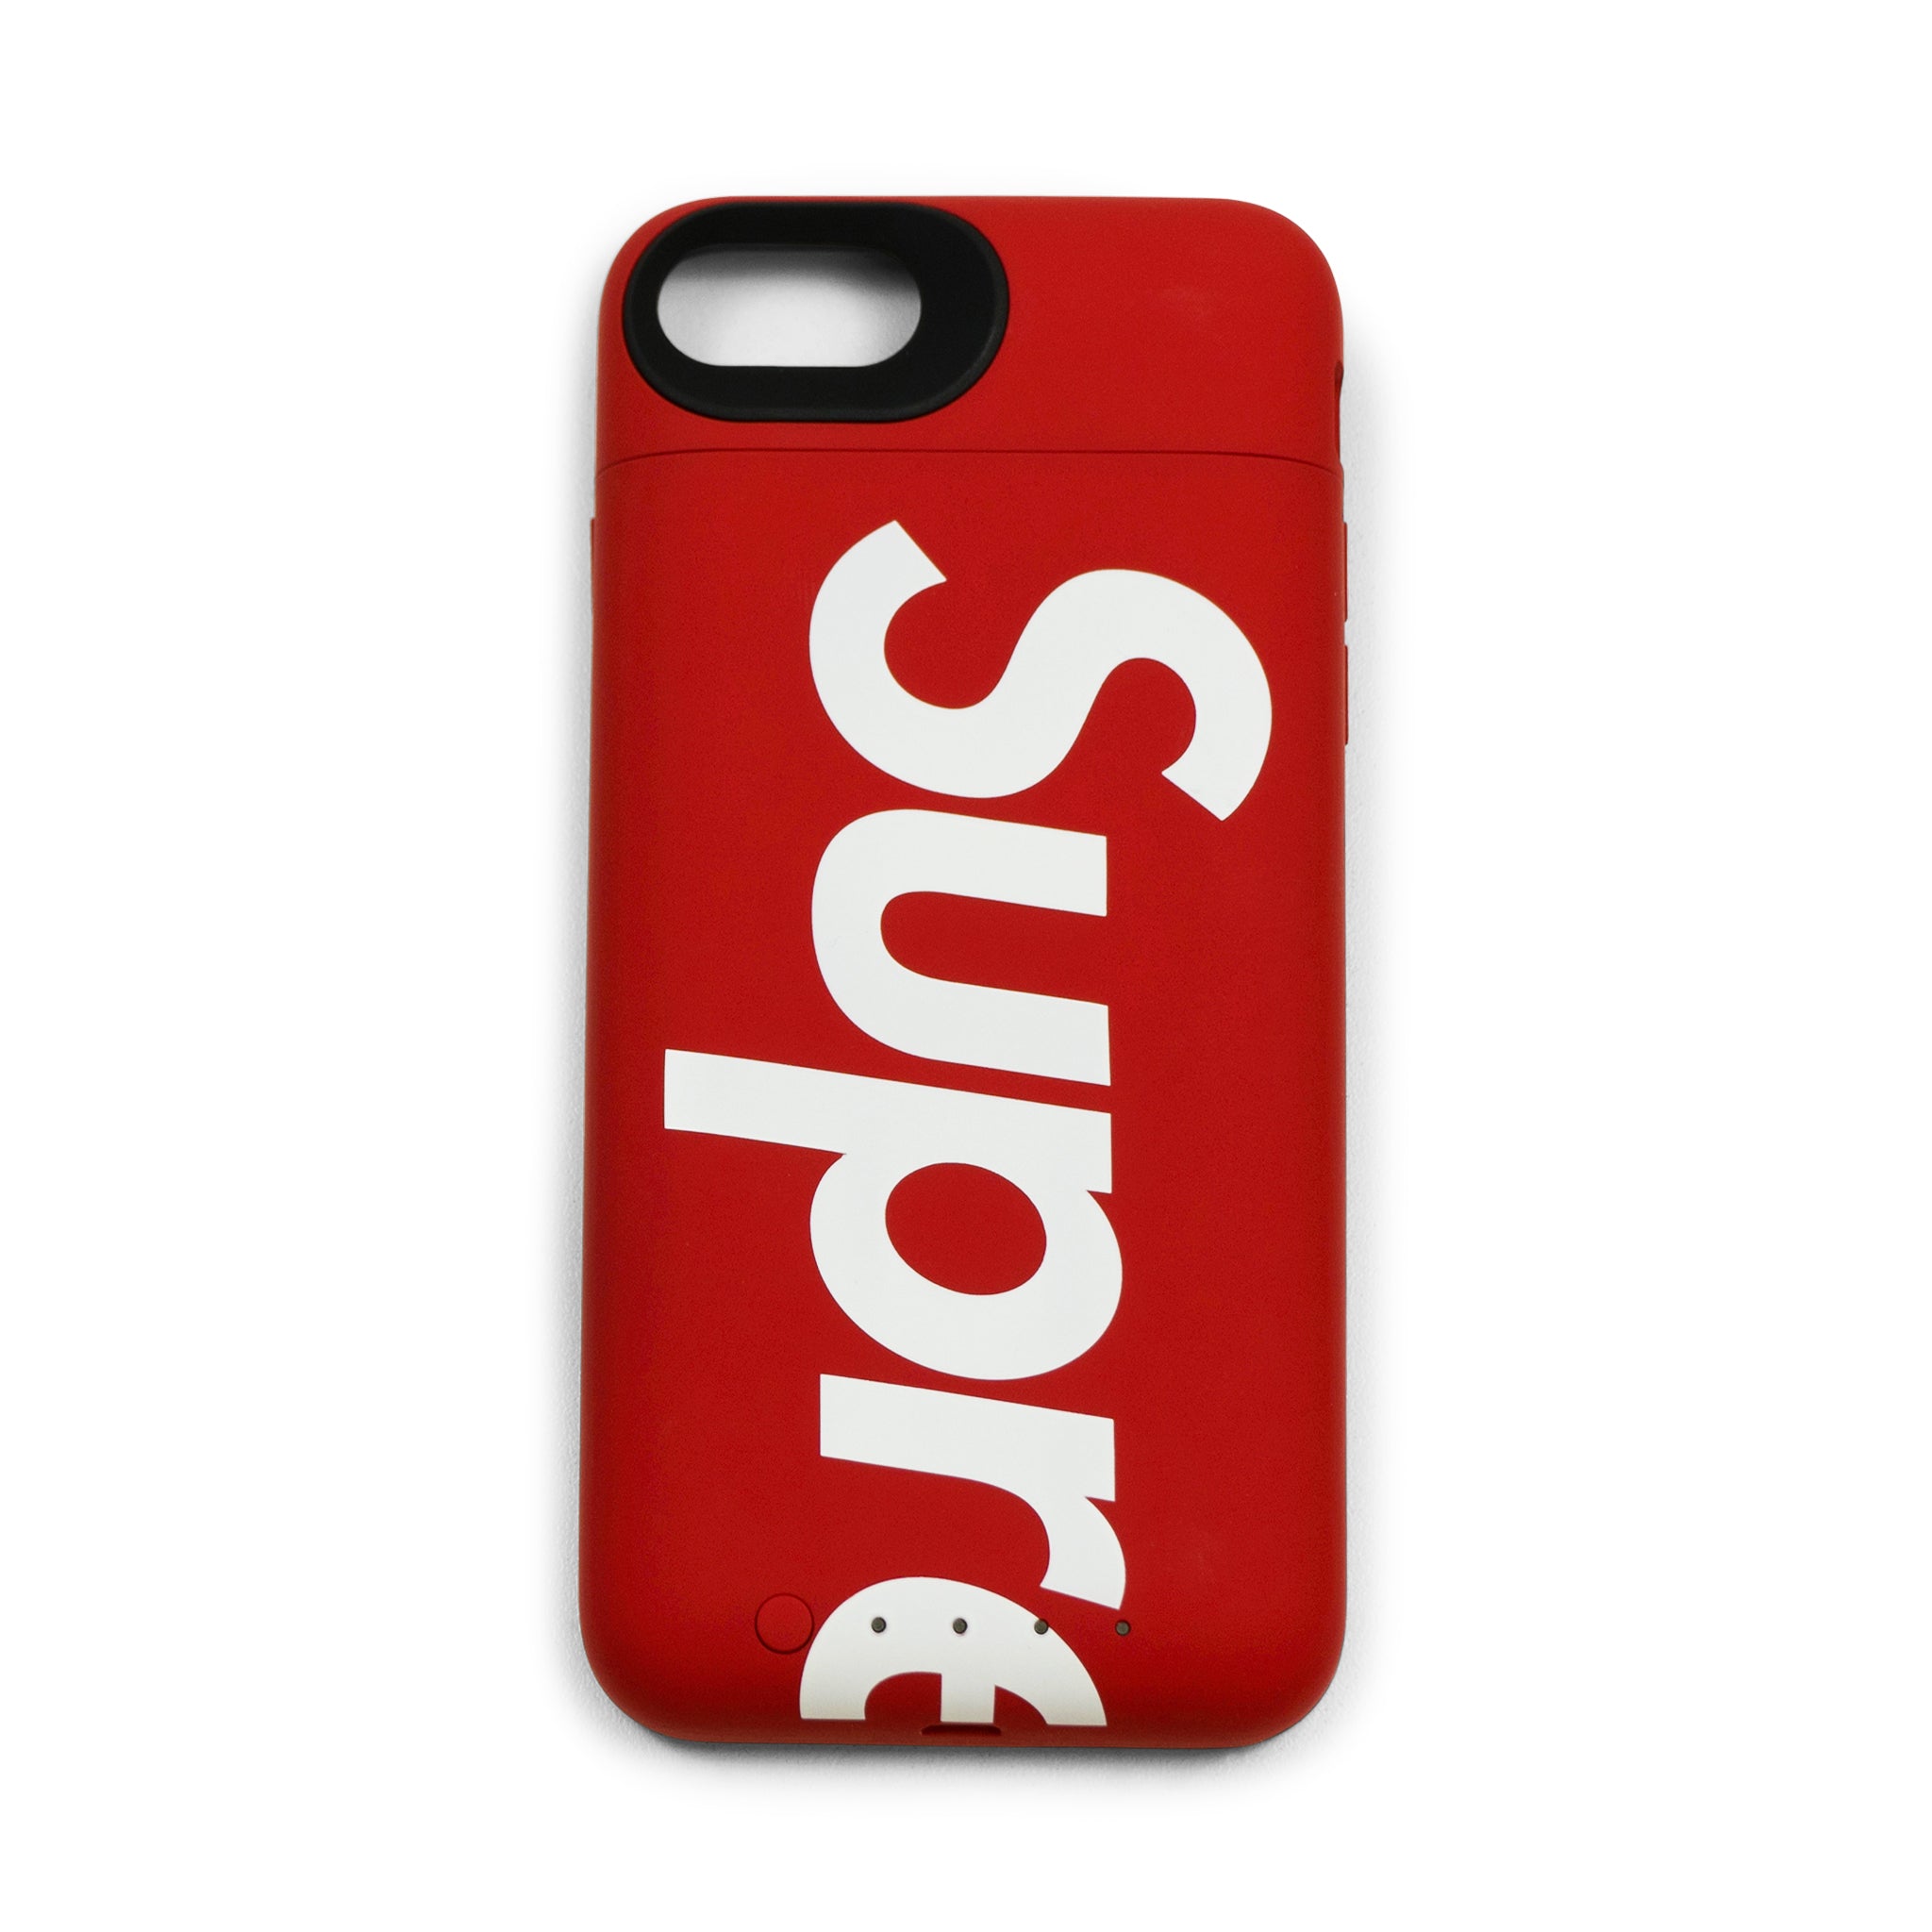 supreme mophie iPhone8Plus ケース